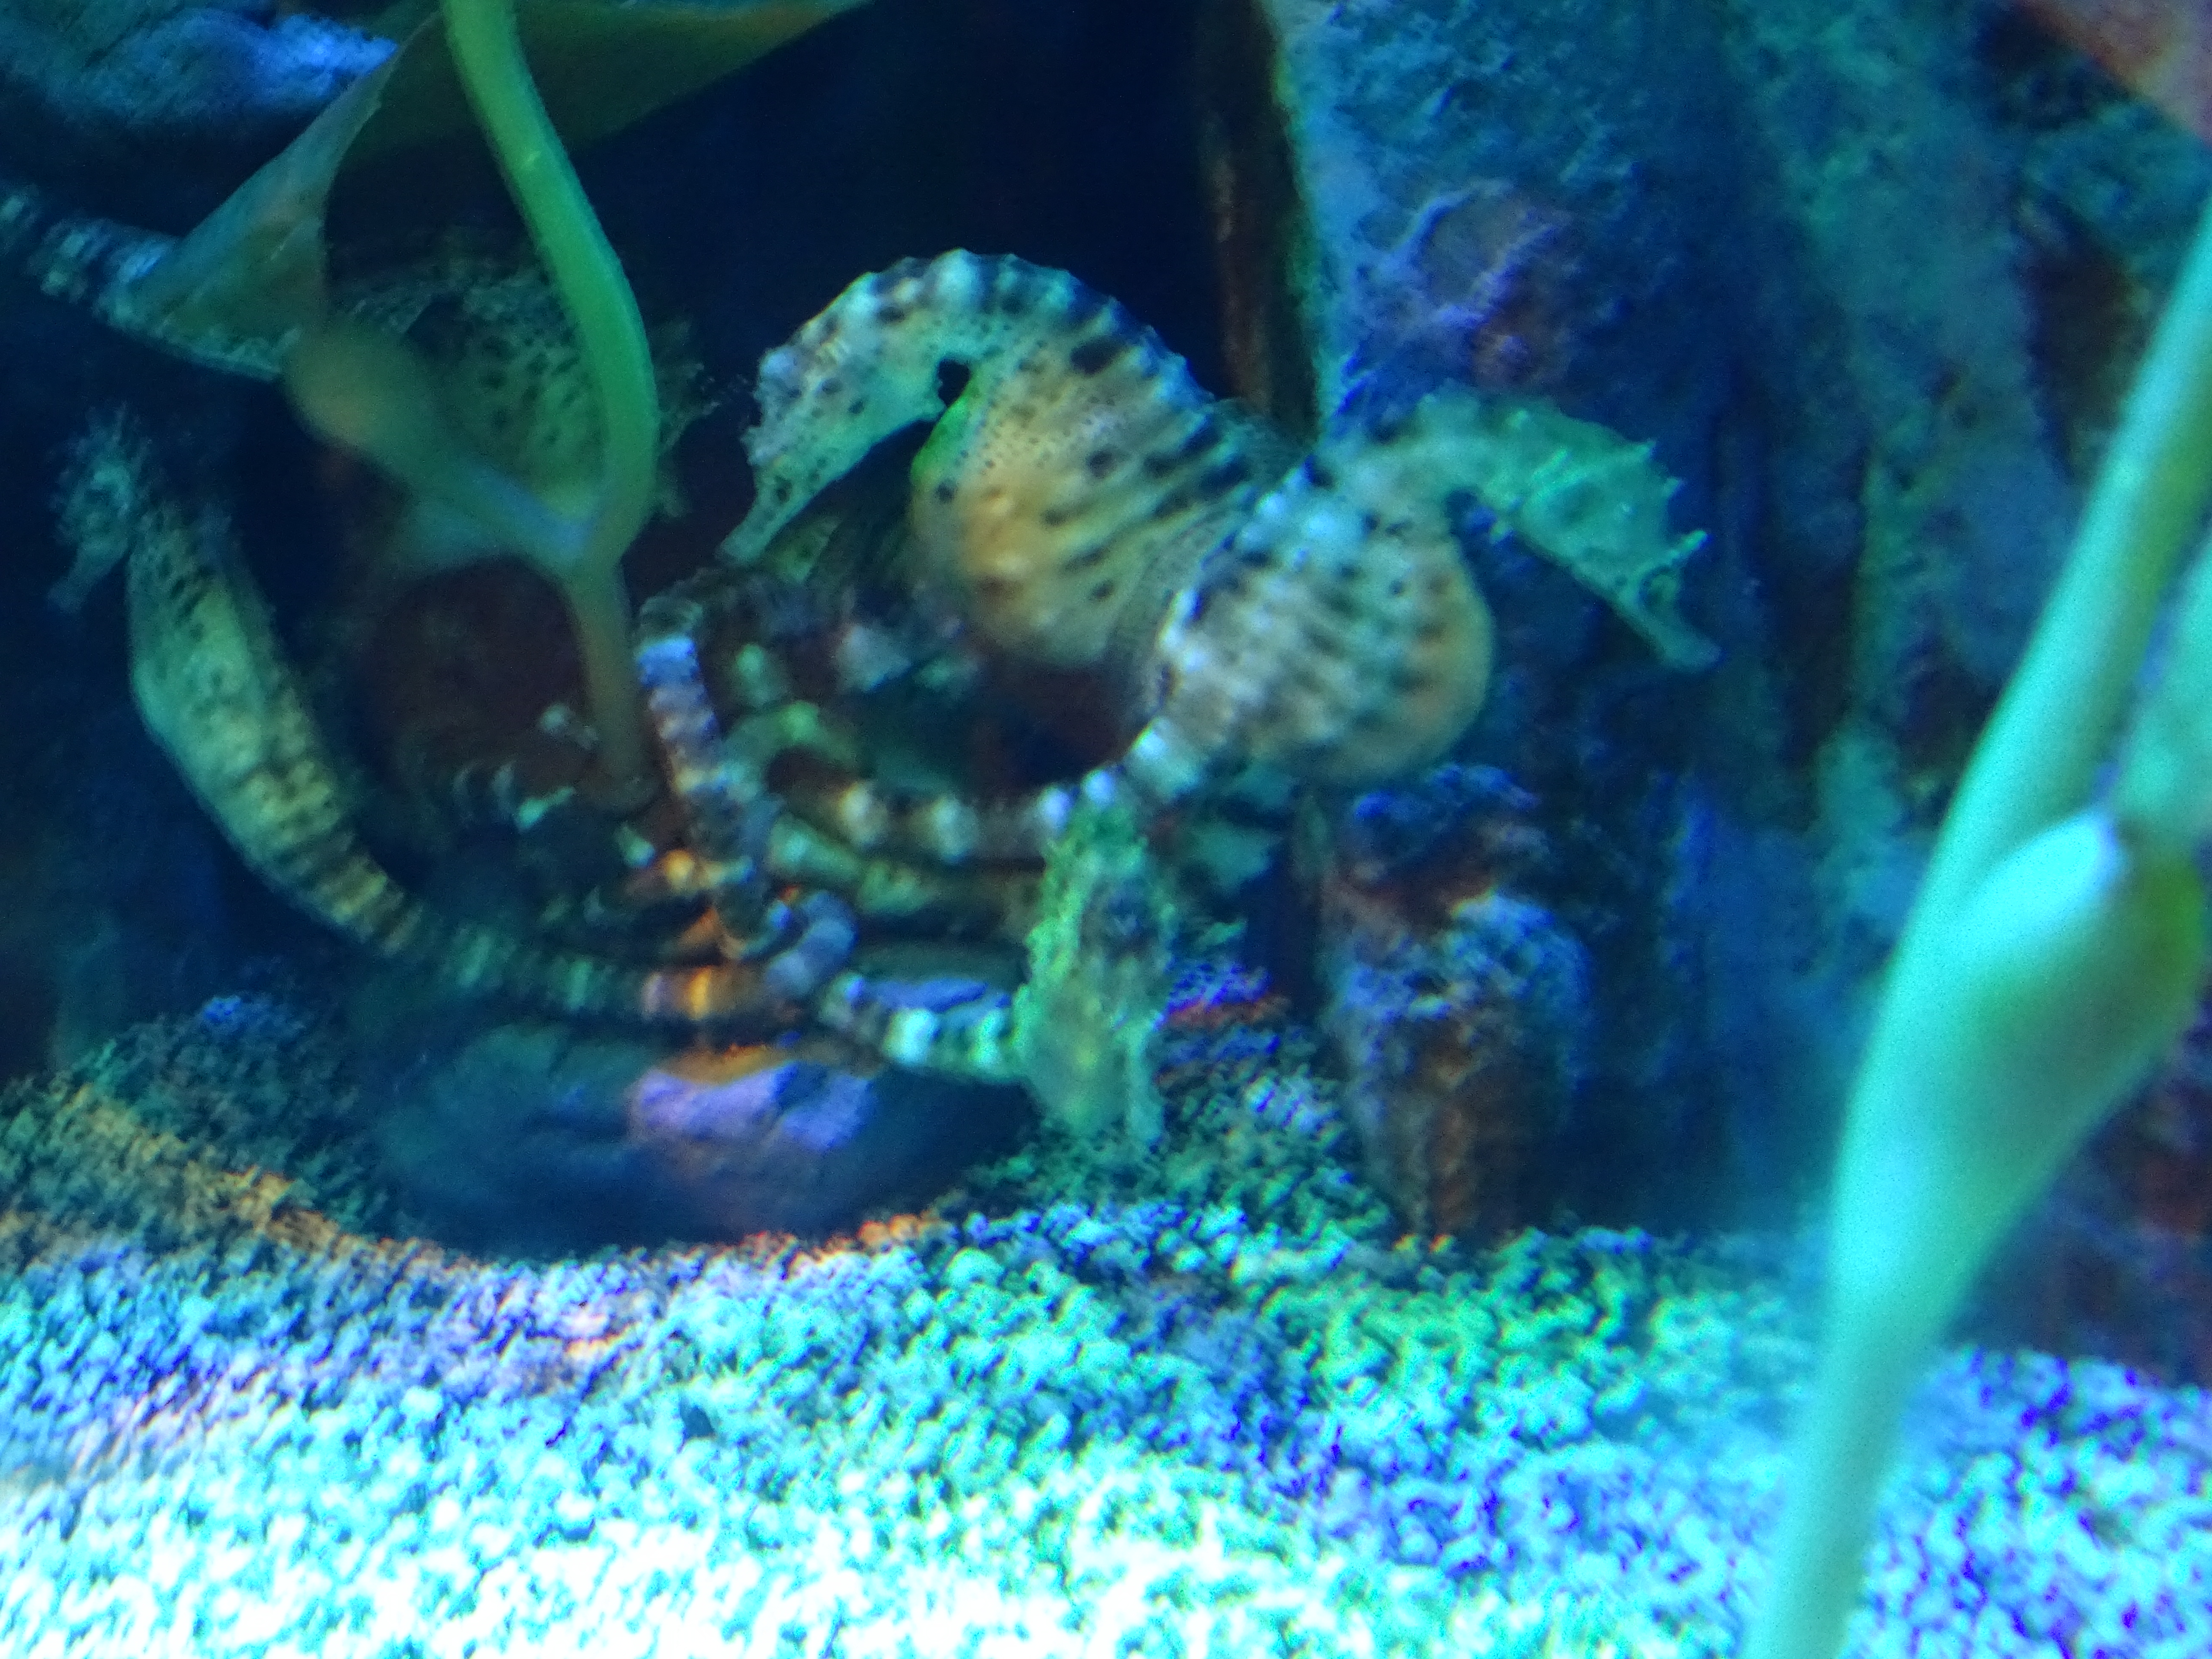 Looking for something to do in Orlando that isn't Disney? Consider visiting SEALIFE Orlando. This small but fun aquarium is packed with sea life to watch.